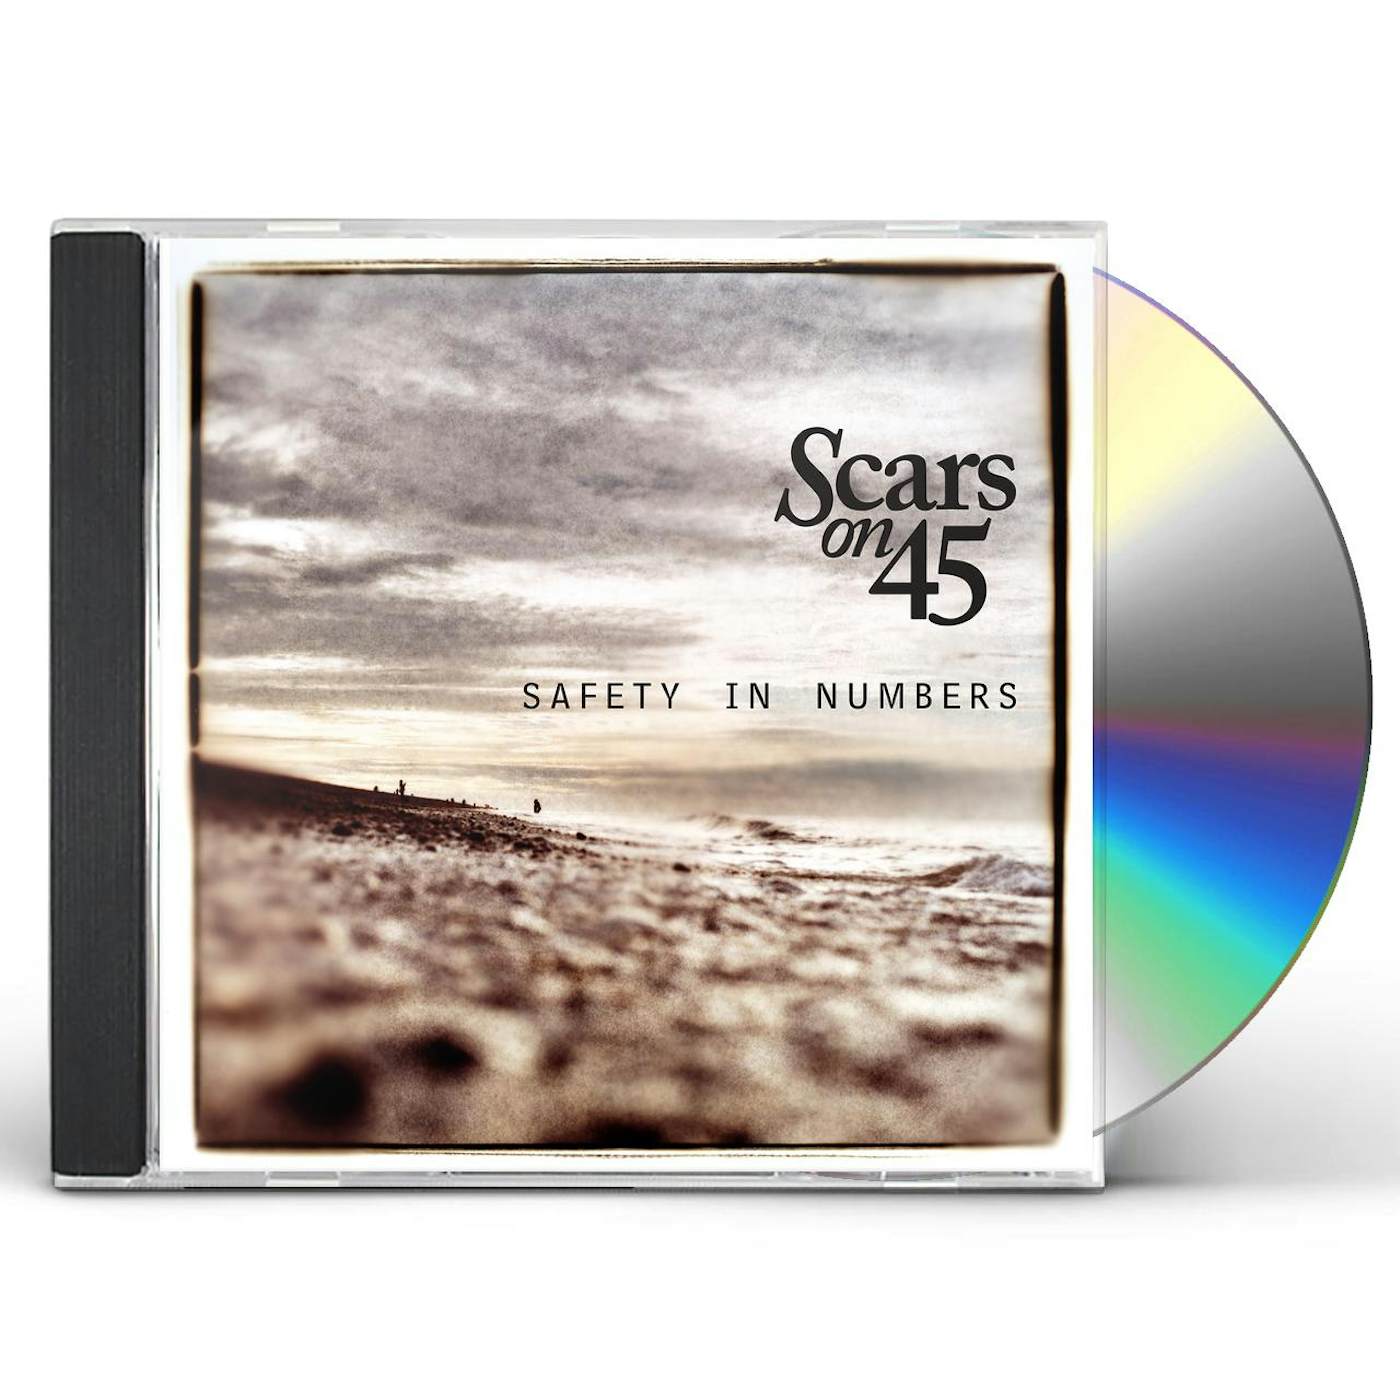 Scars On 45 SAFETY IN NUMBERS CD